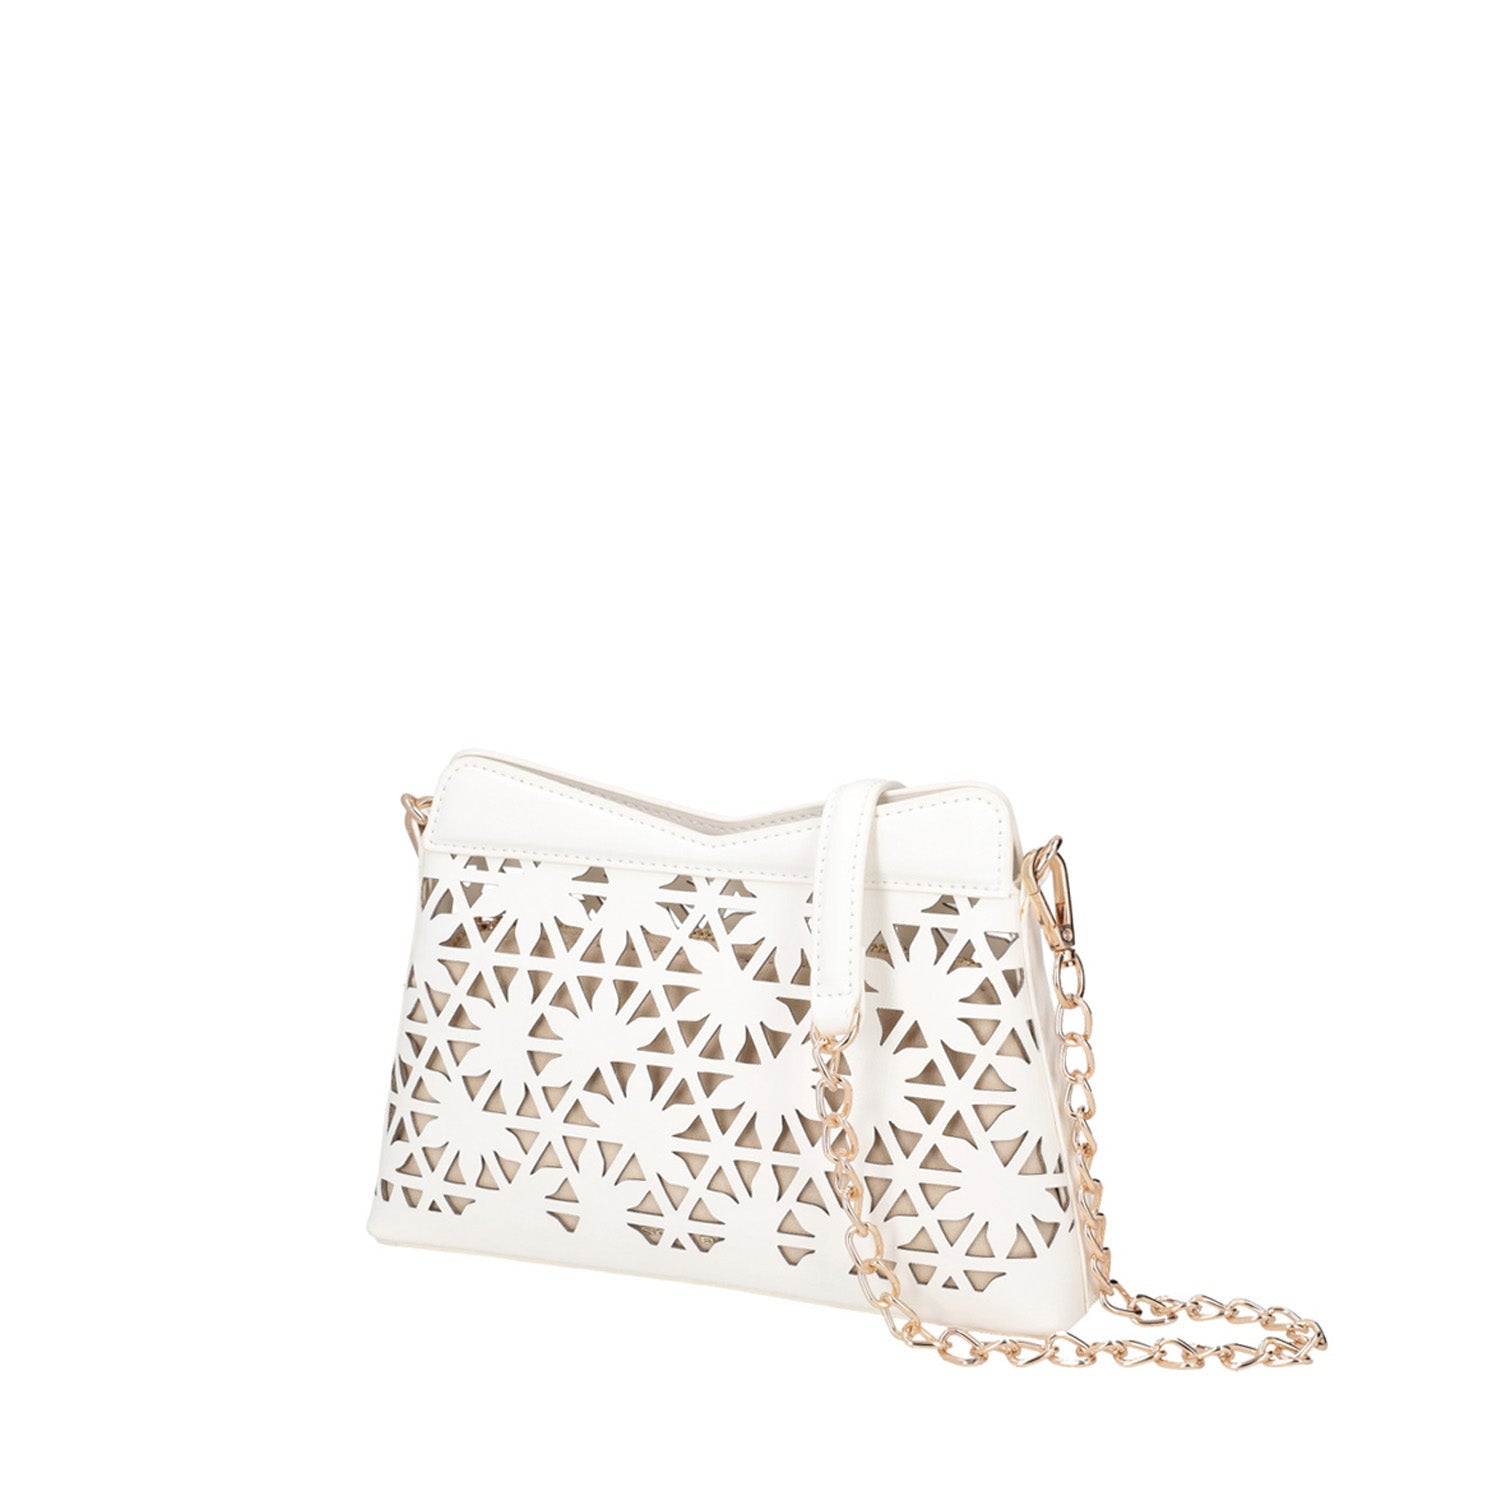 WHITE PEONIA LASERED CROSSBODY BAG WITH GOLD CHAIN